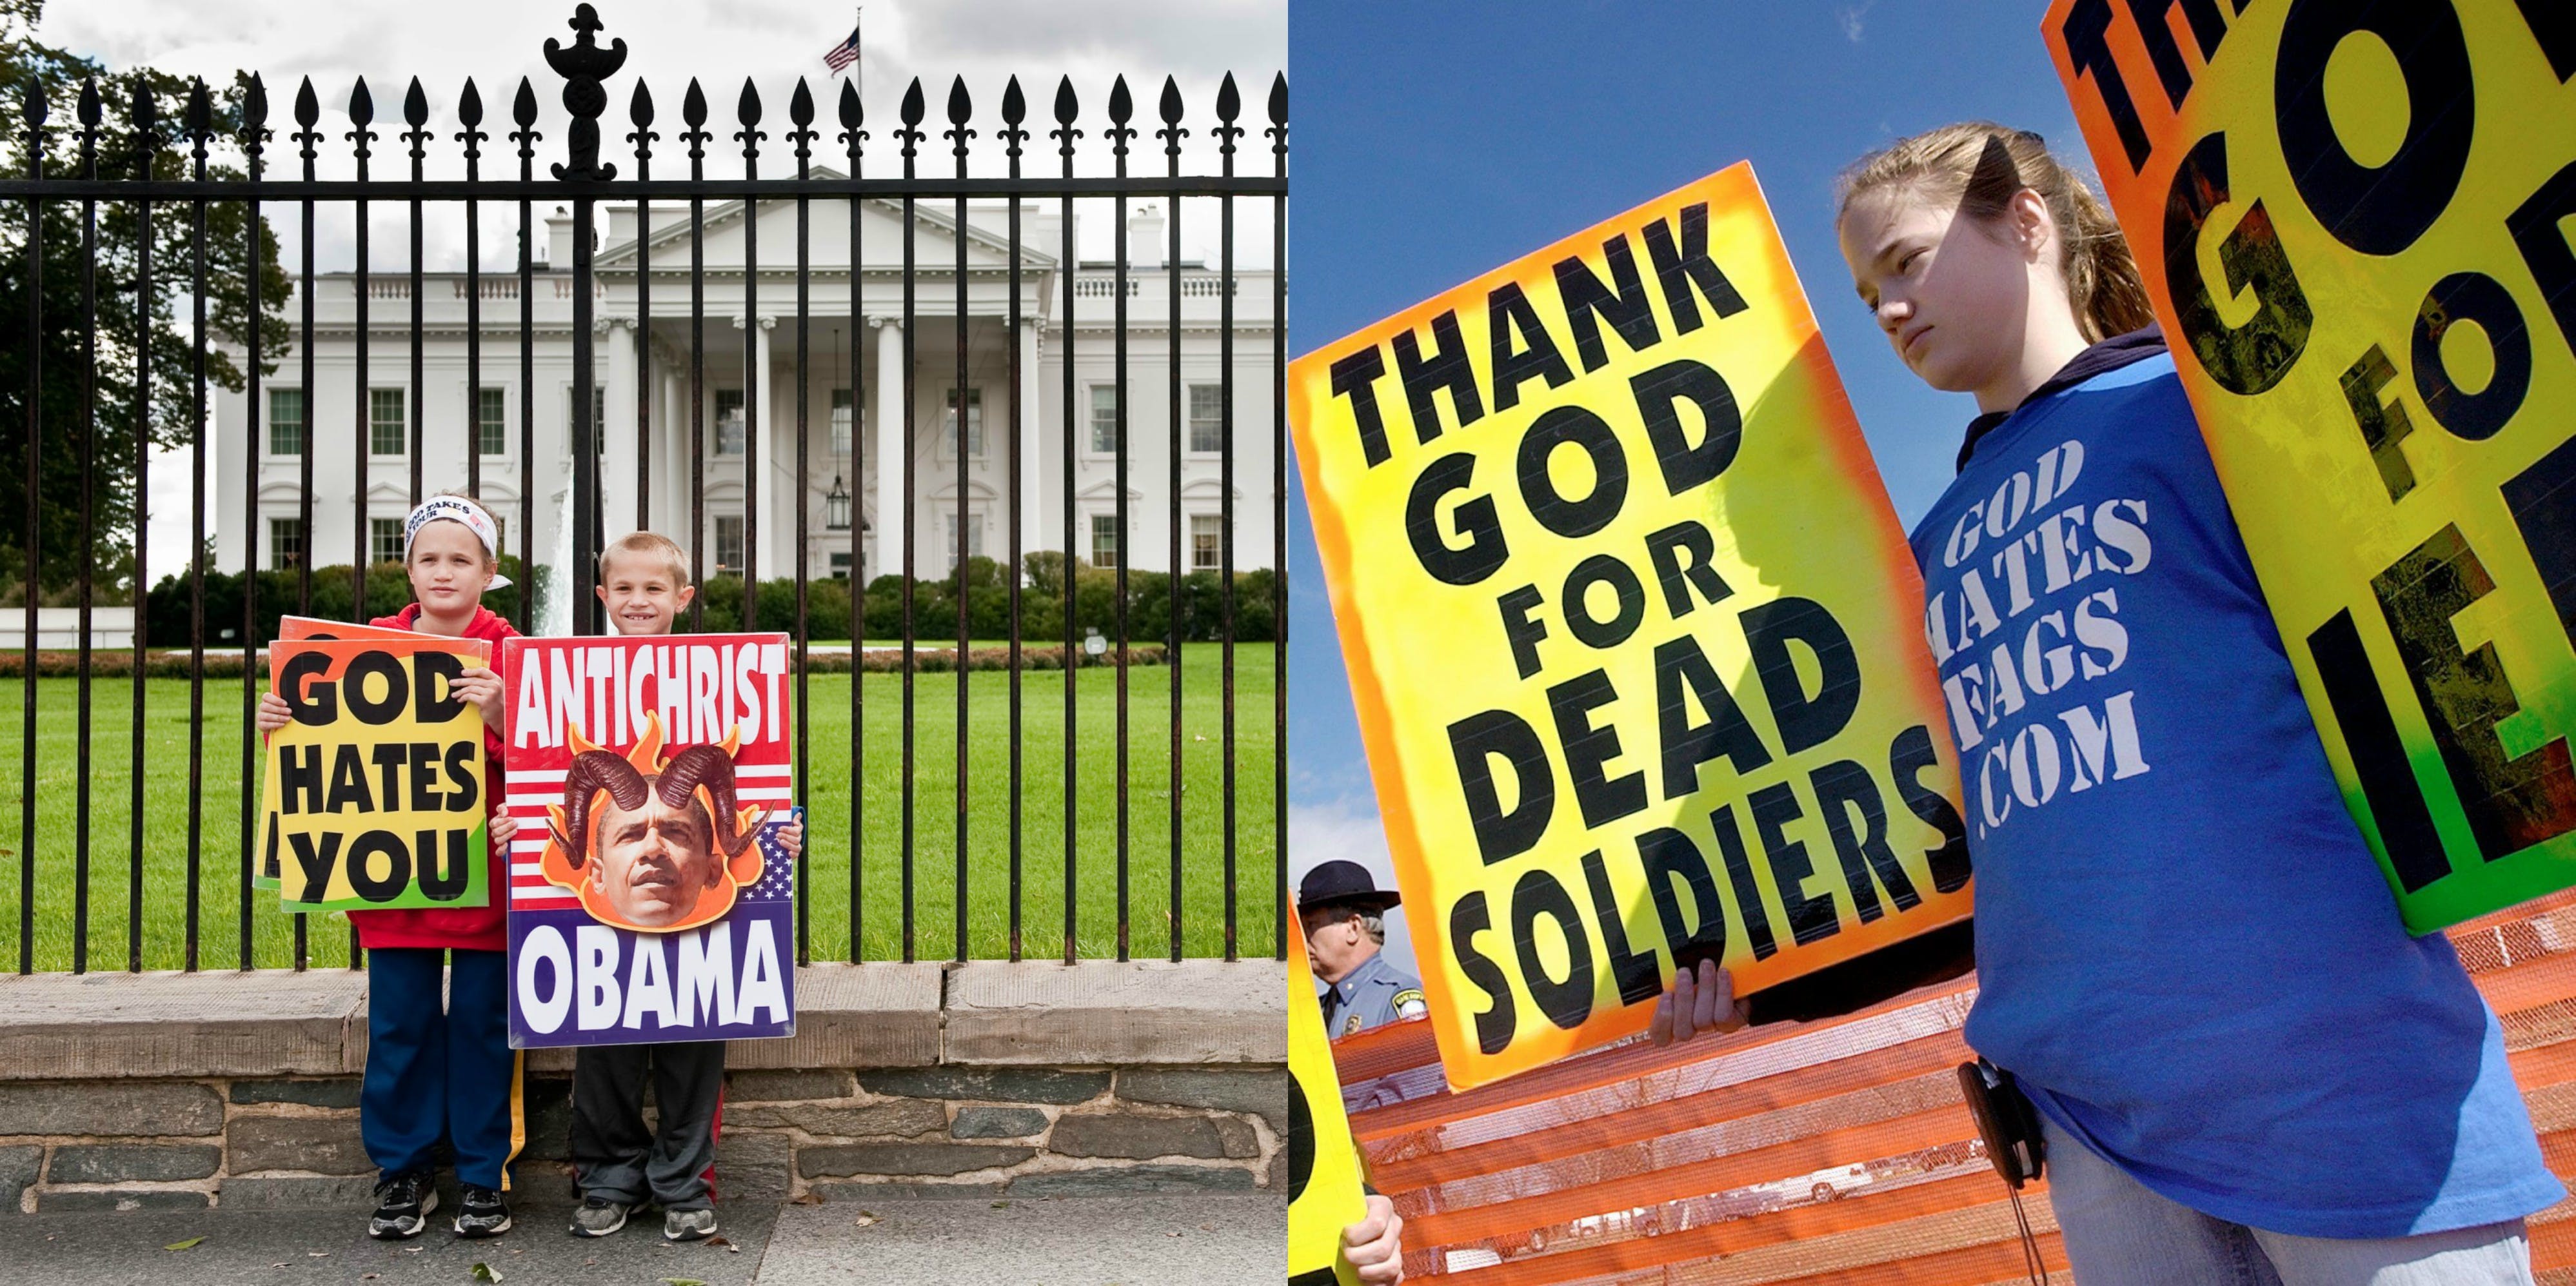 8 Of The Most Cruel & Dreadful Facts About Westboro Baptist Church.